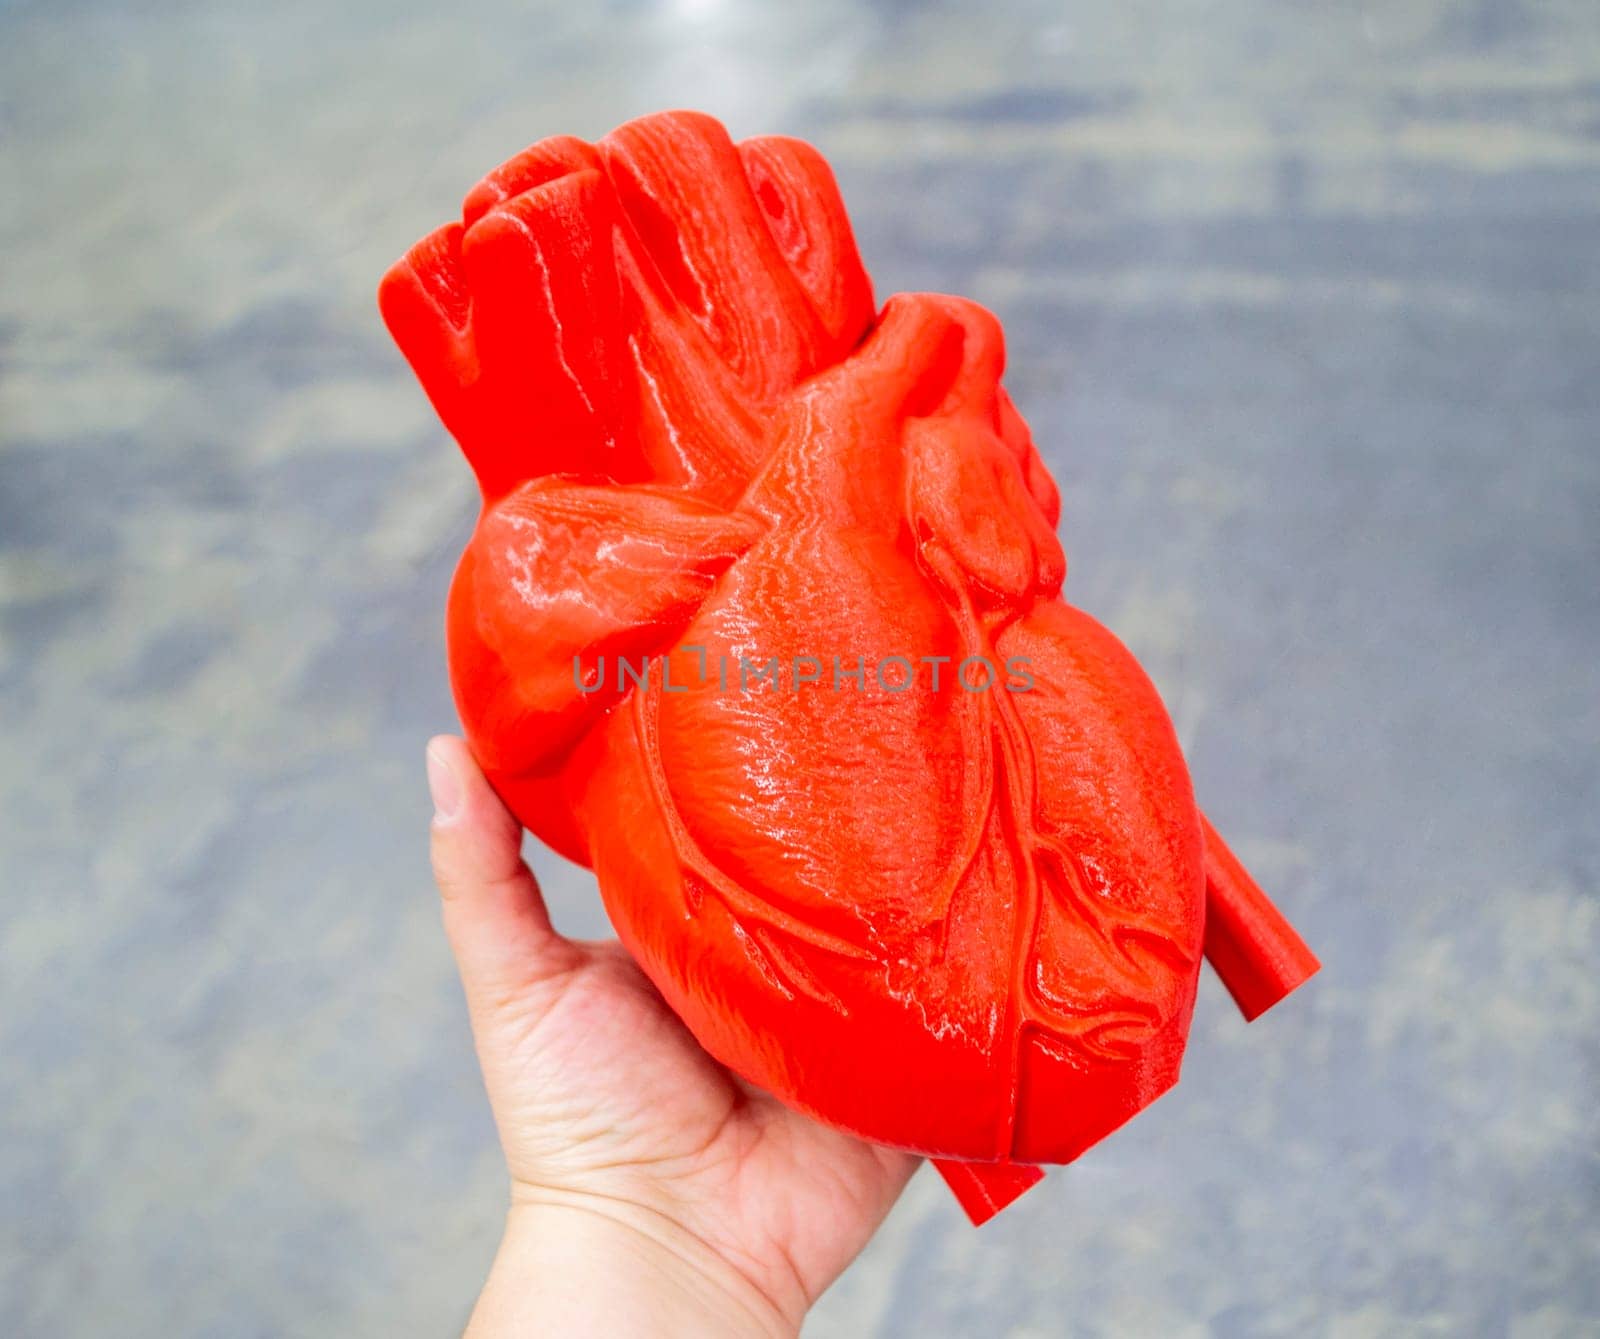 Person holding in hand prototype of human heart 3D printed from molten red plastic. Model of human heart printed on 3D printer close-up. New modern additive 3D printing medical healthcare technologies